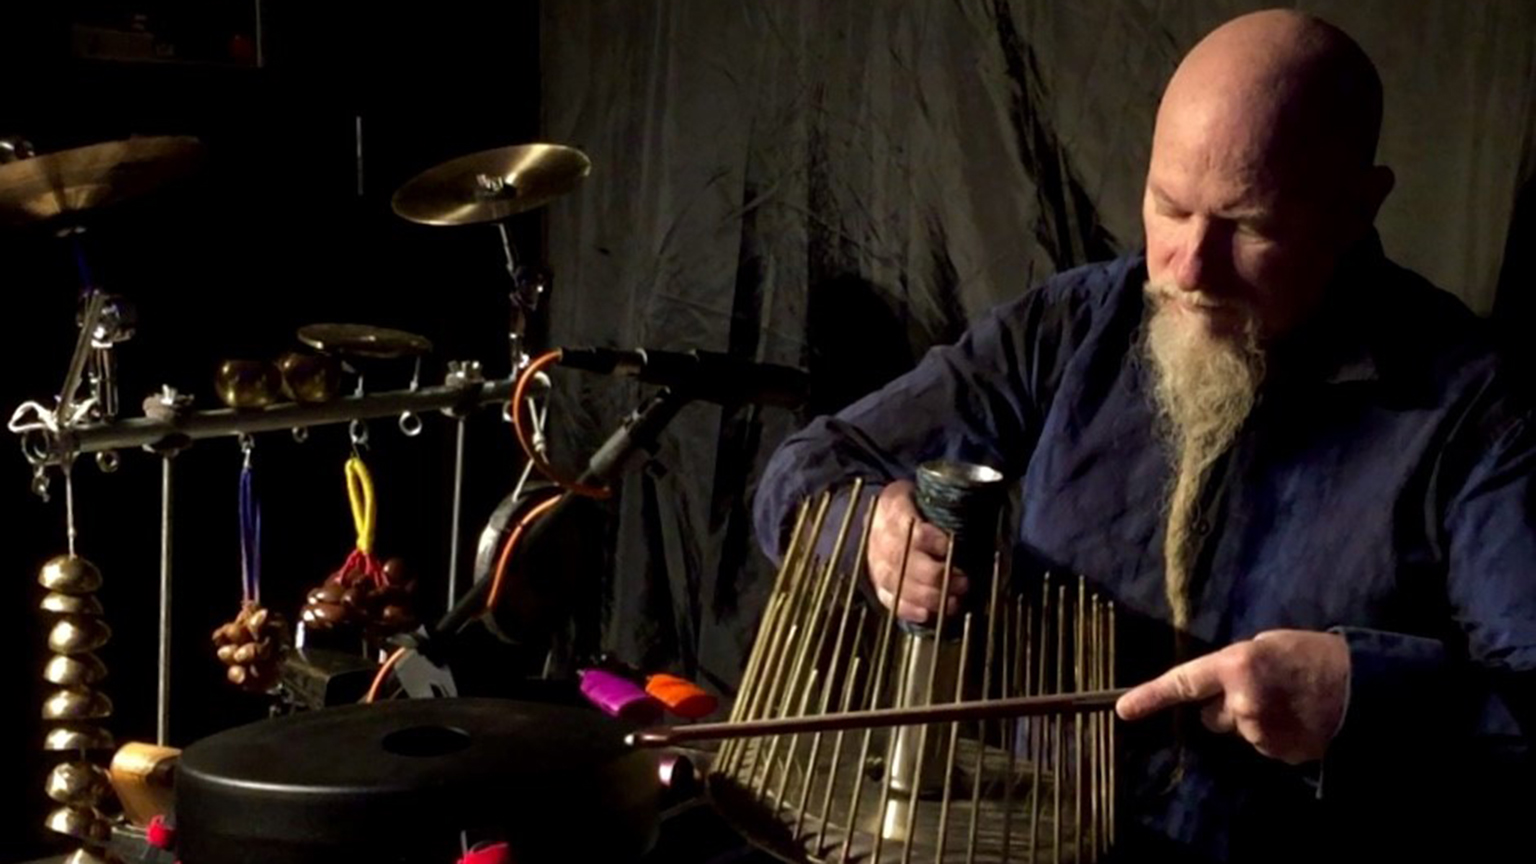 Klimchak playing a created instrument created with rods and a stem running through the middle.